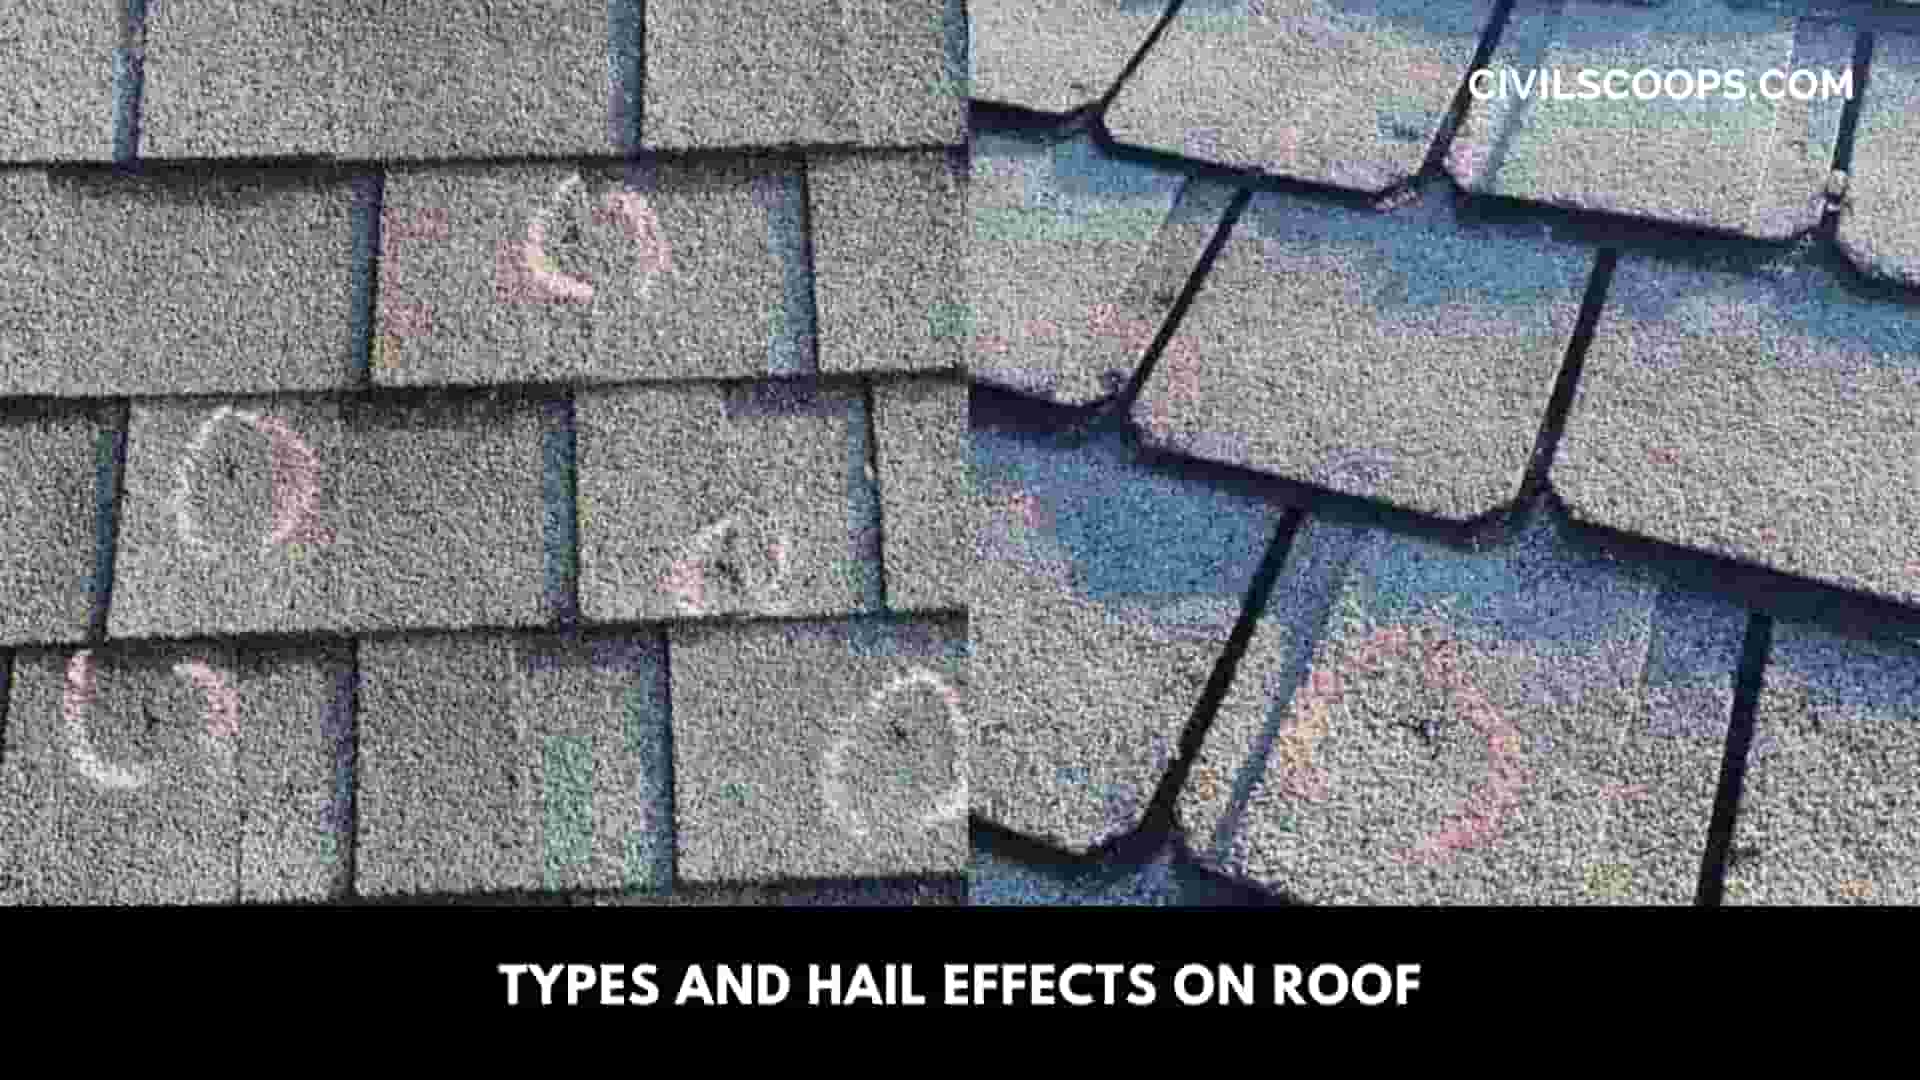 Types and Hail Effects on Roof